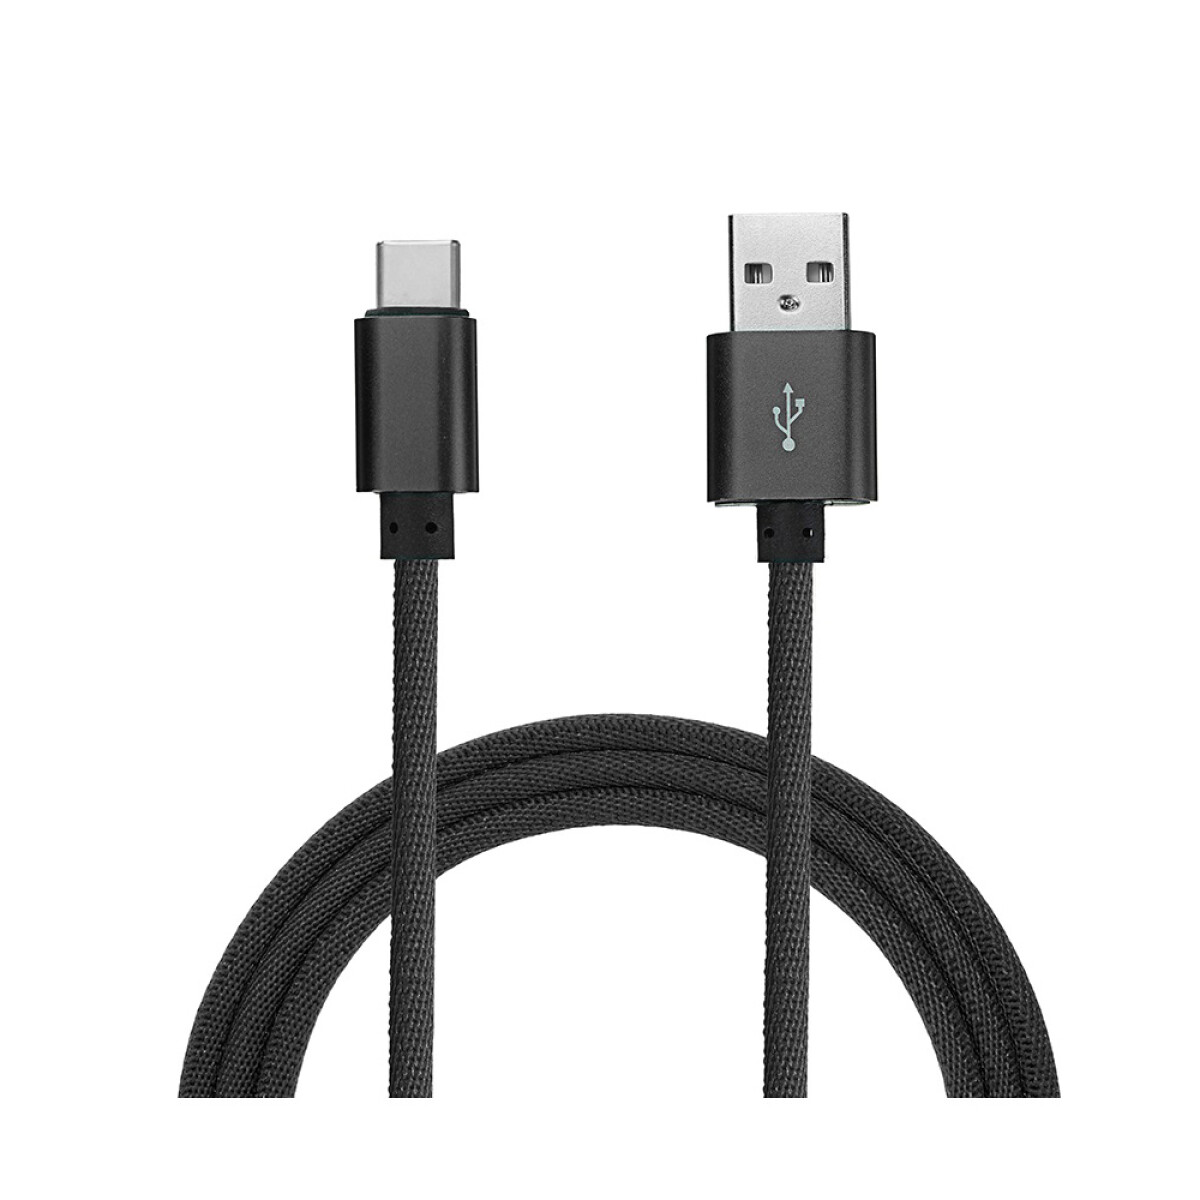 Cable usb c braided 1m xiaomi Cable usb c braided 1m xiaomi negro